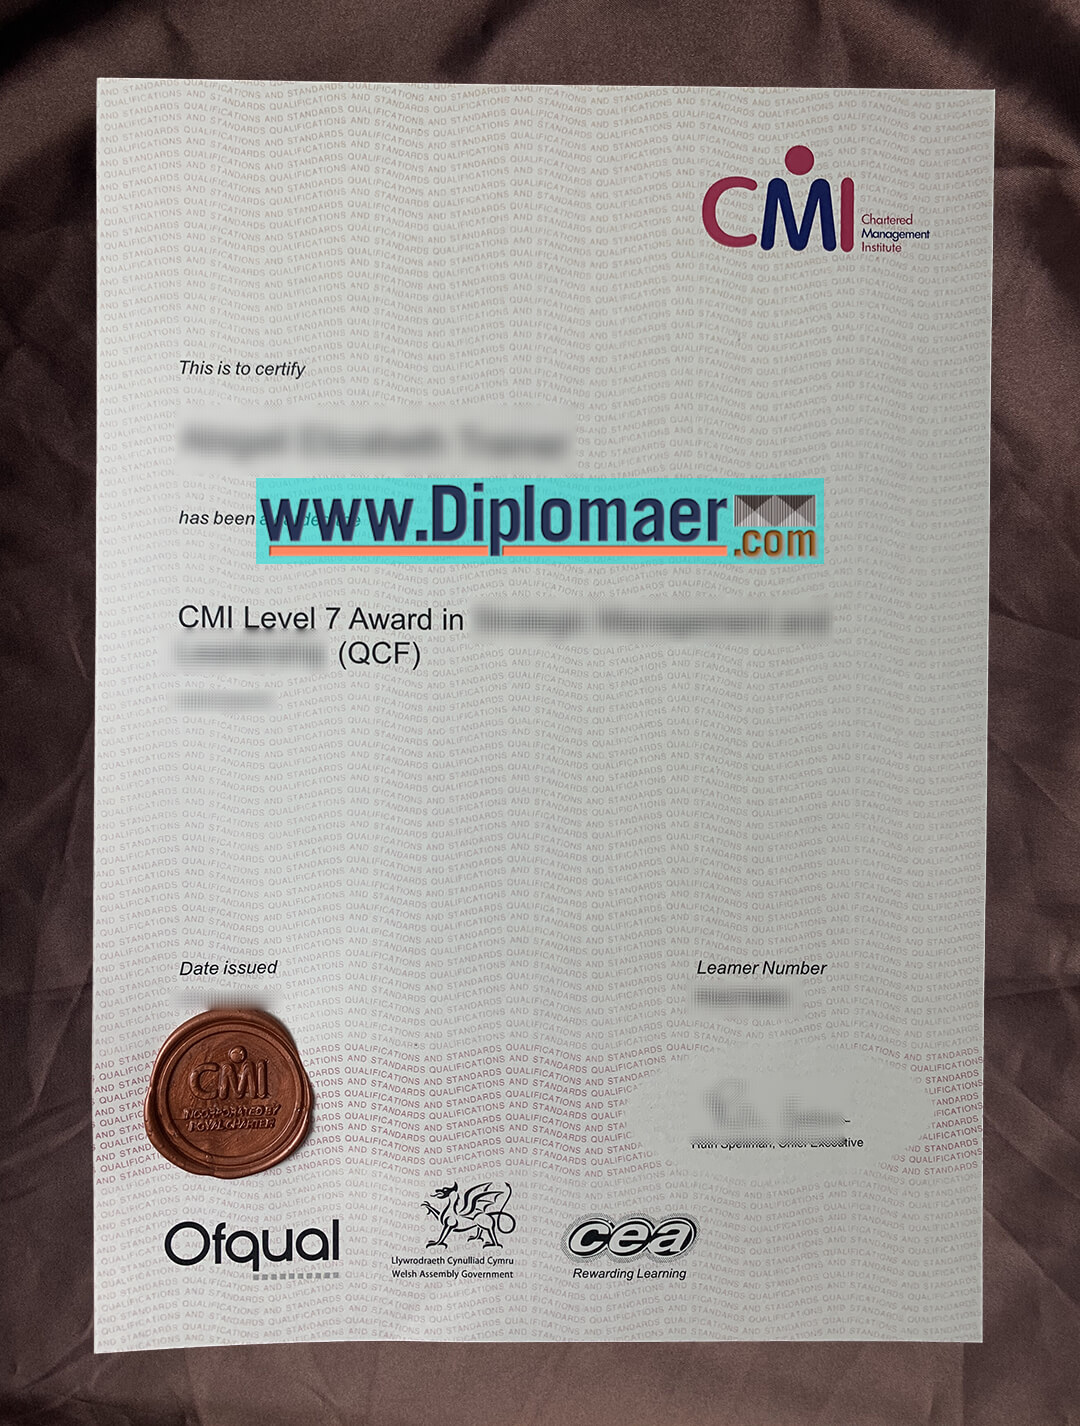 Chartered Management Institute Fake Diploma - What is the use of a Chartered Management Institute Level 7 Certificate?